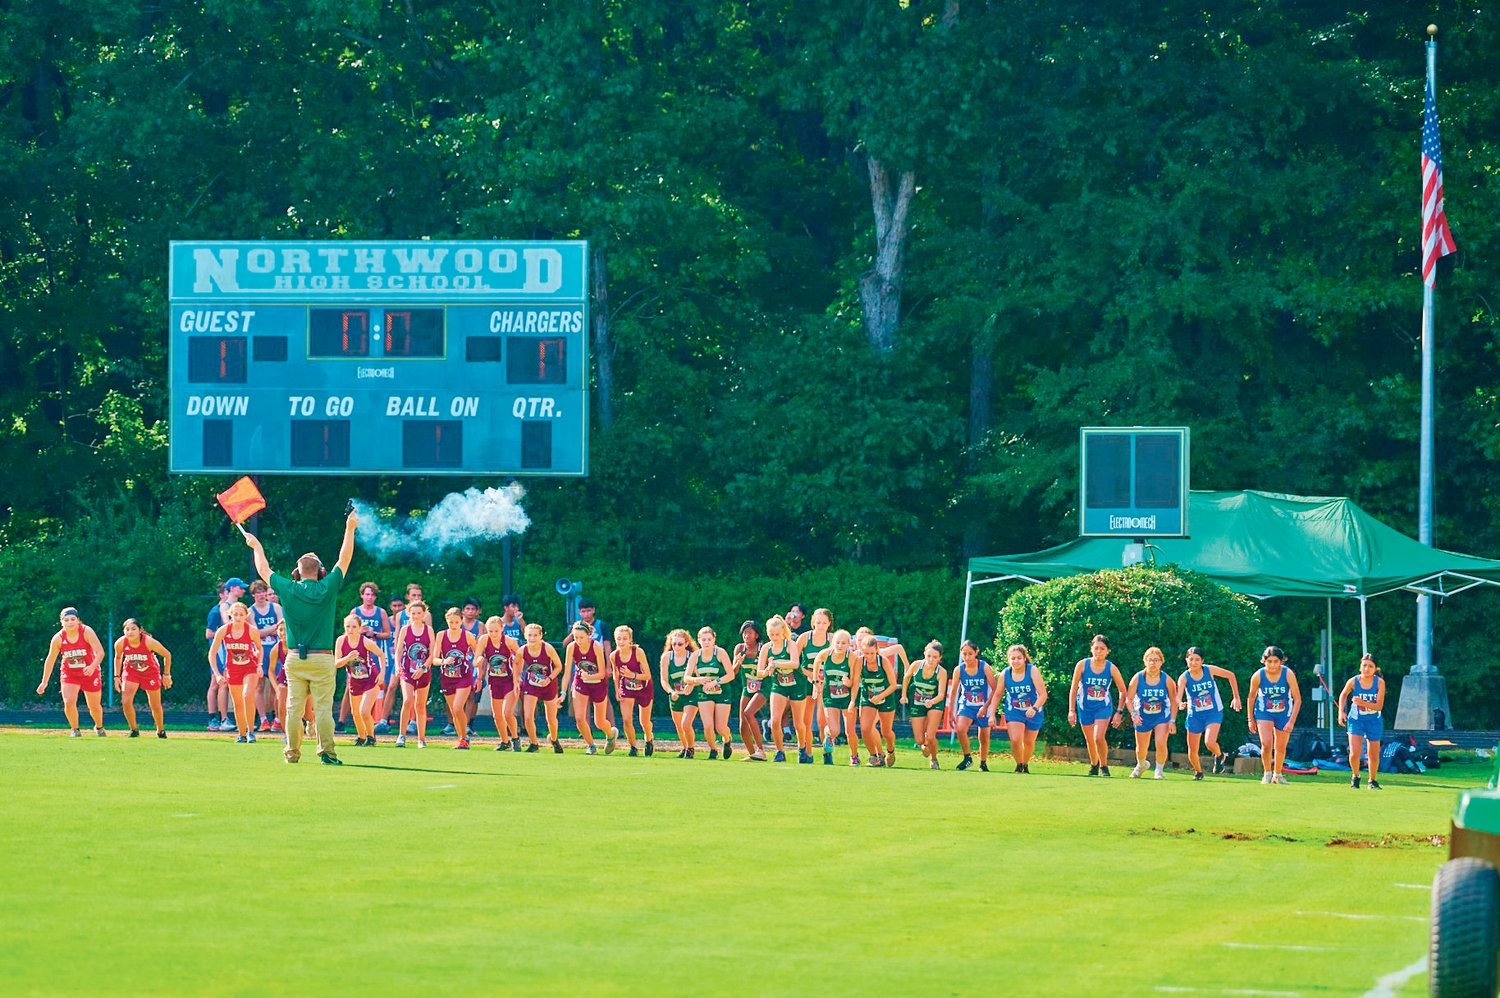 Northwood head cross country coach Cameron Isenhour (with flag) fires off the starting shot to begin the women's race at the Chatham County Championships meet last Thursday in Pittsboro. 27 runners from Chatham Central, Jordan-Matthews, Northwood and Seaforth participated in the event.